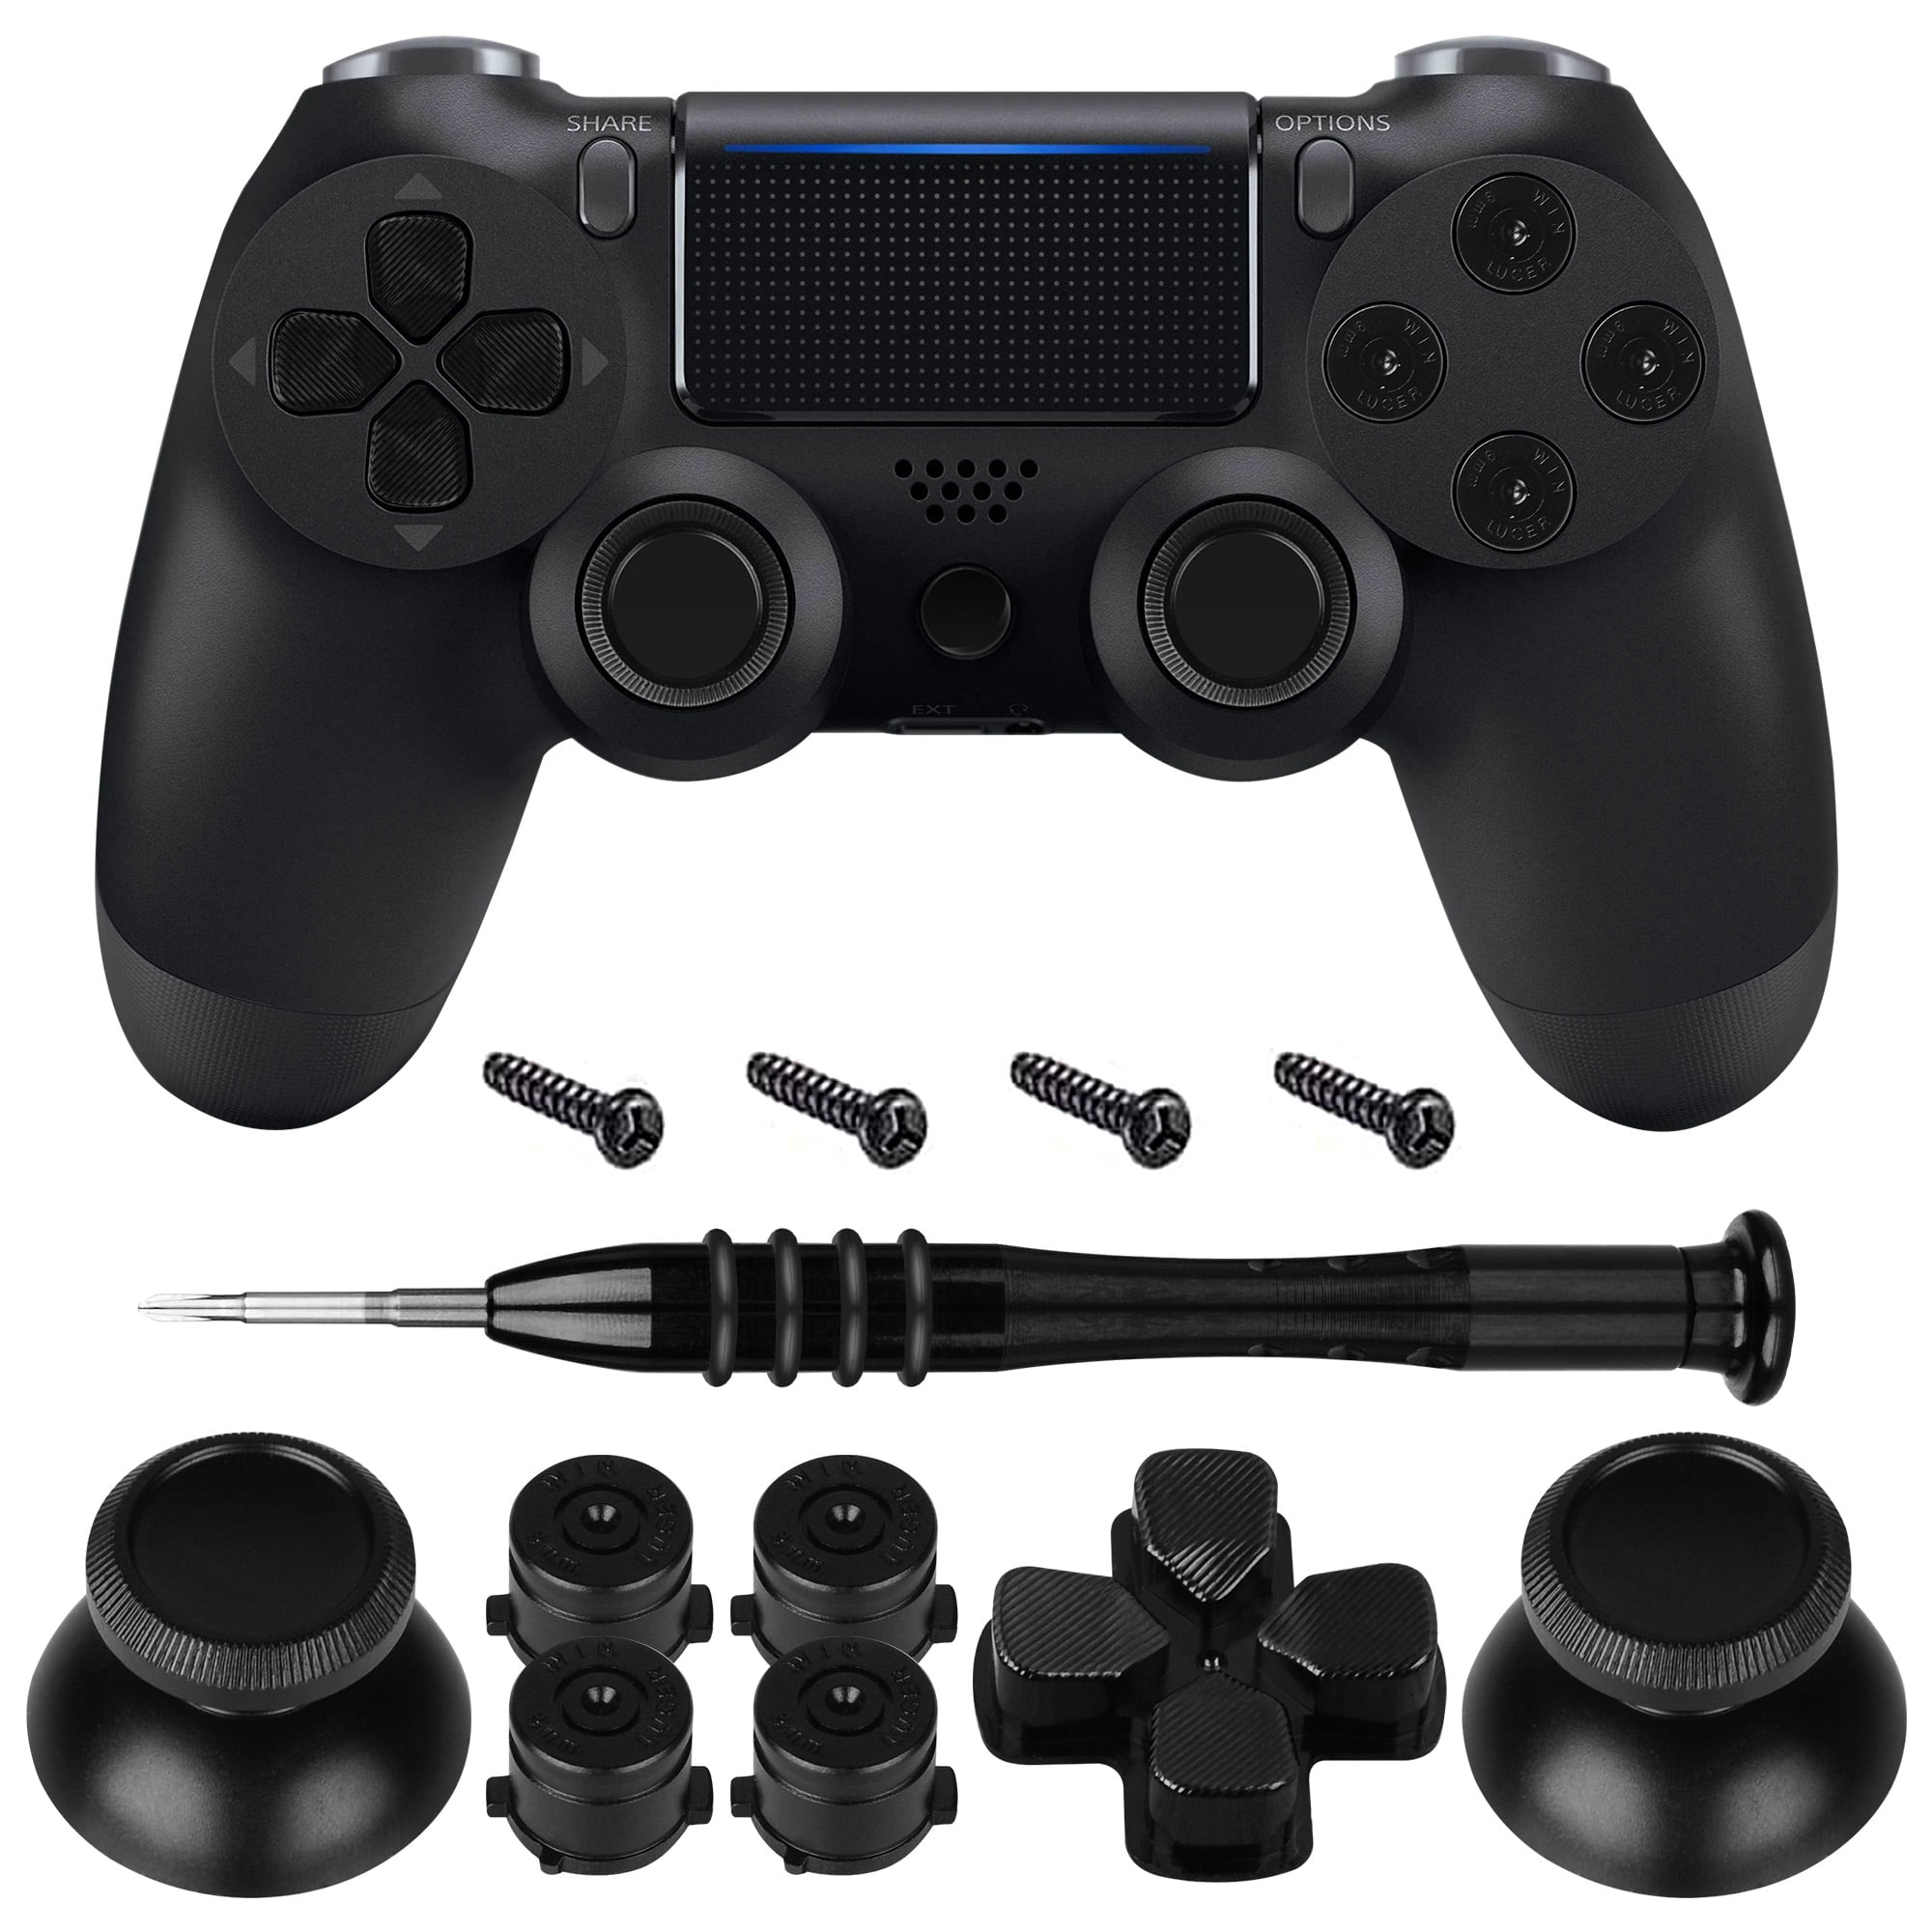 Geekria Replacement Joystick Repair Kit, Metal Buttons DualShock 4, Controller Repair Kits with for Playstation 5, Playstation 4, PS4 Slim, PS4 Pro, CUH-ZCT2 (Black) - Walmart.com